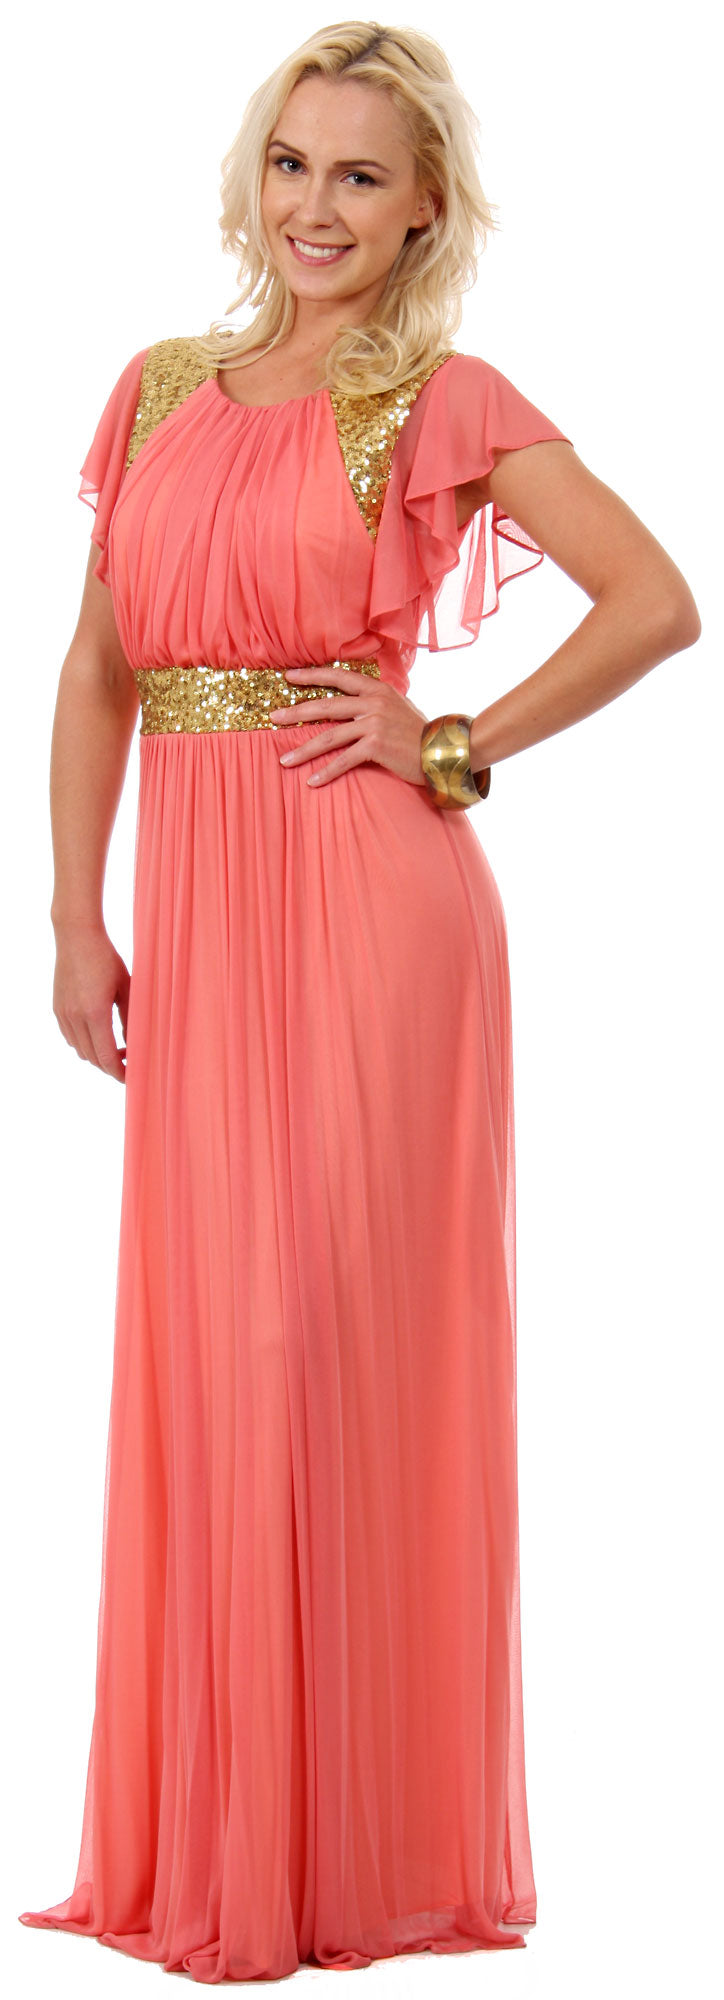 Image of Ruffle Sleeves Long Formal Bridesmaid Dress With Sequins in Coral